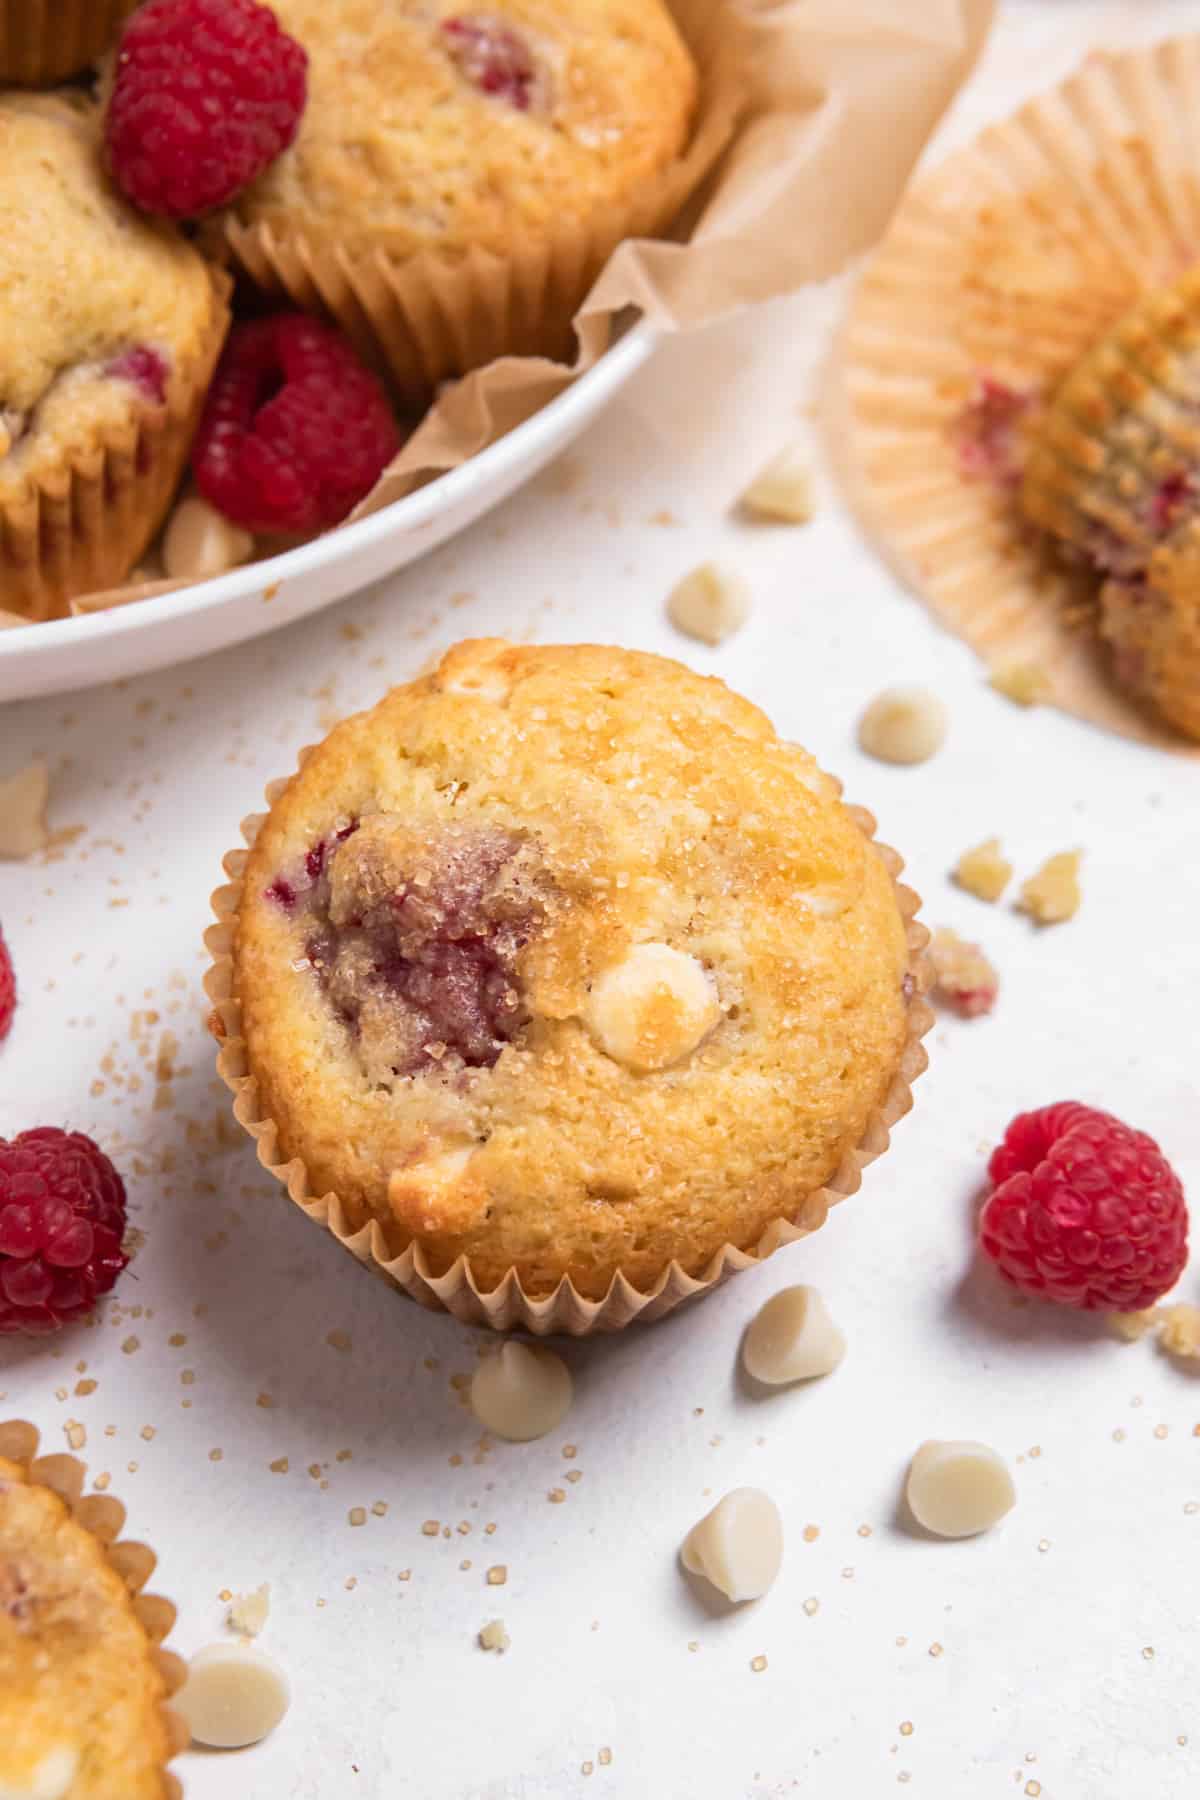 Raspberry white chocolate muffin on counter with morsels and berries surrounding.